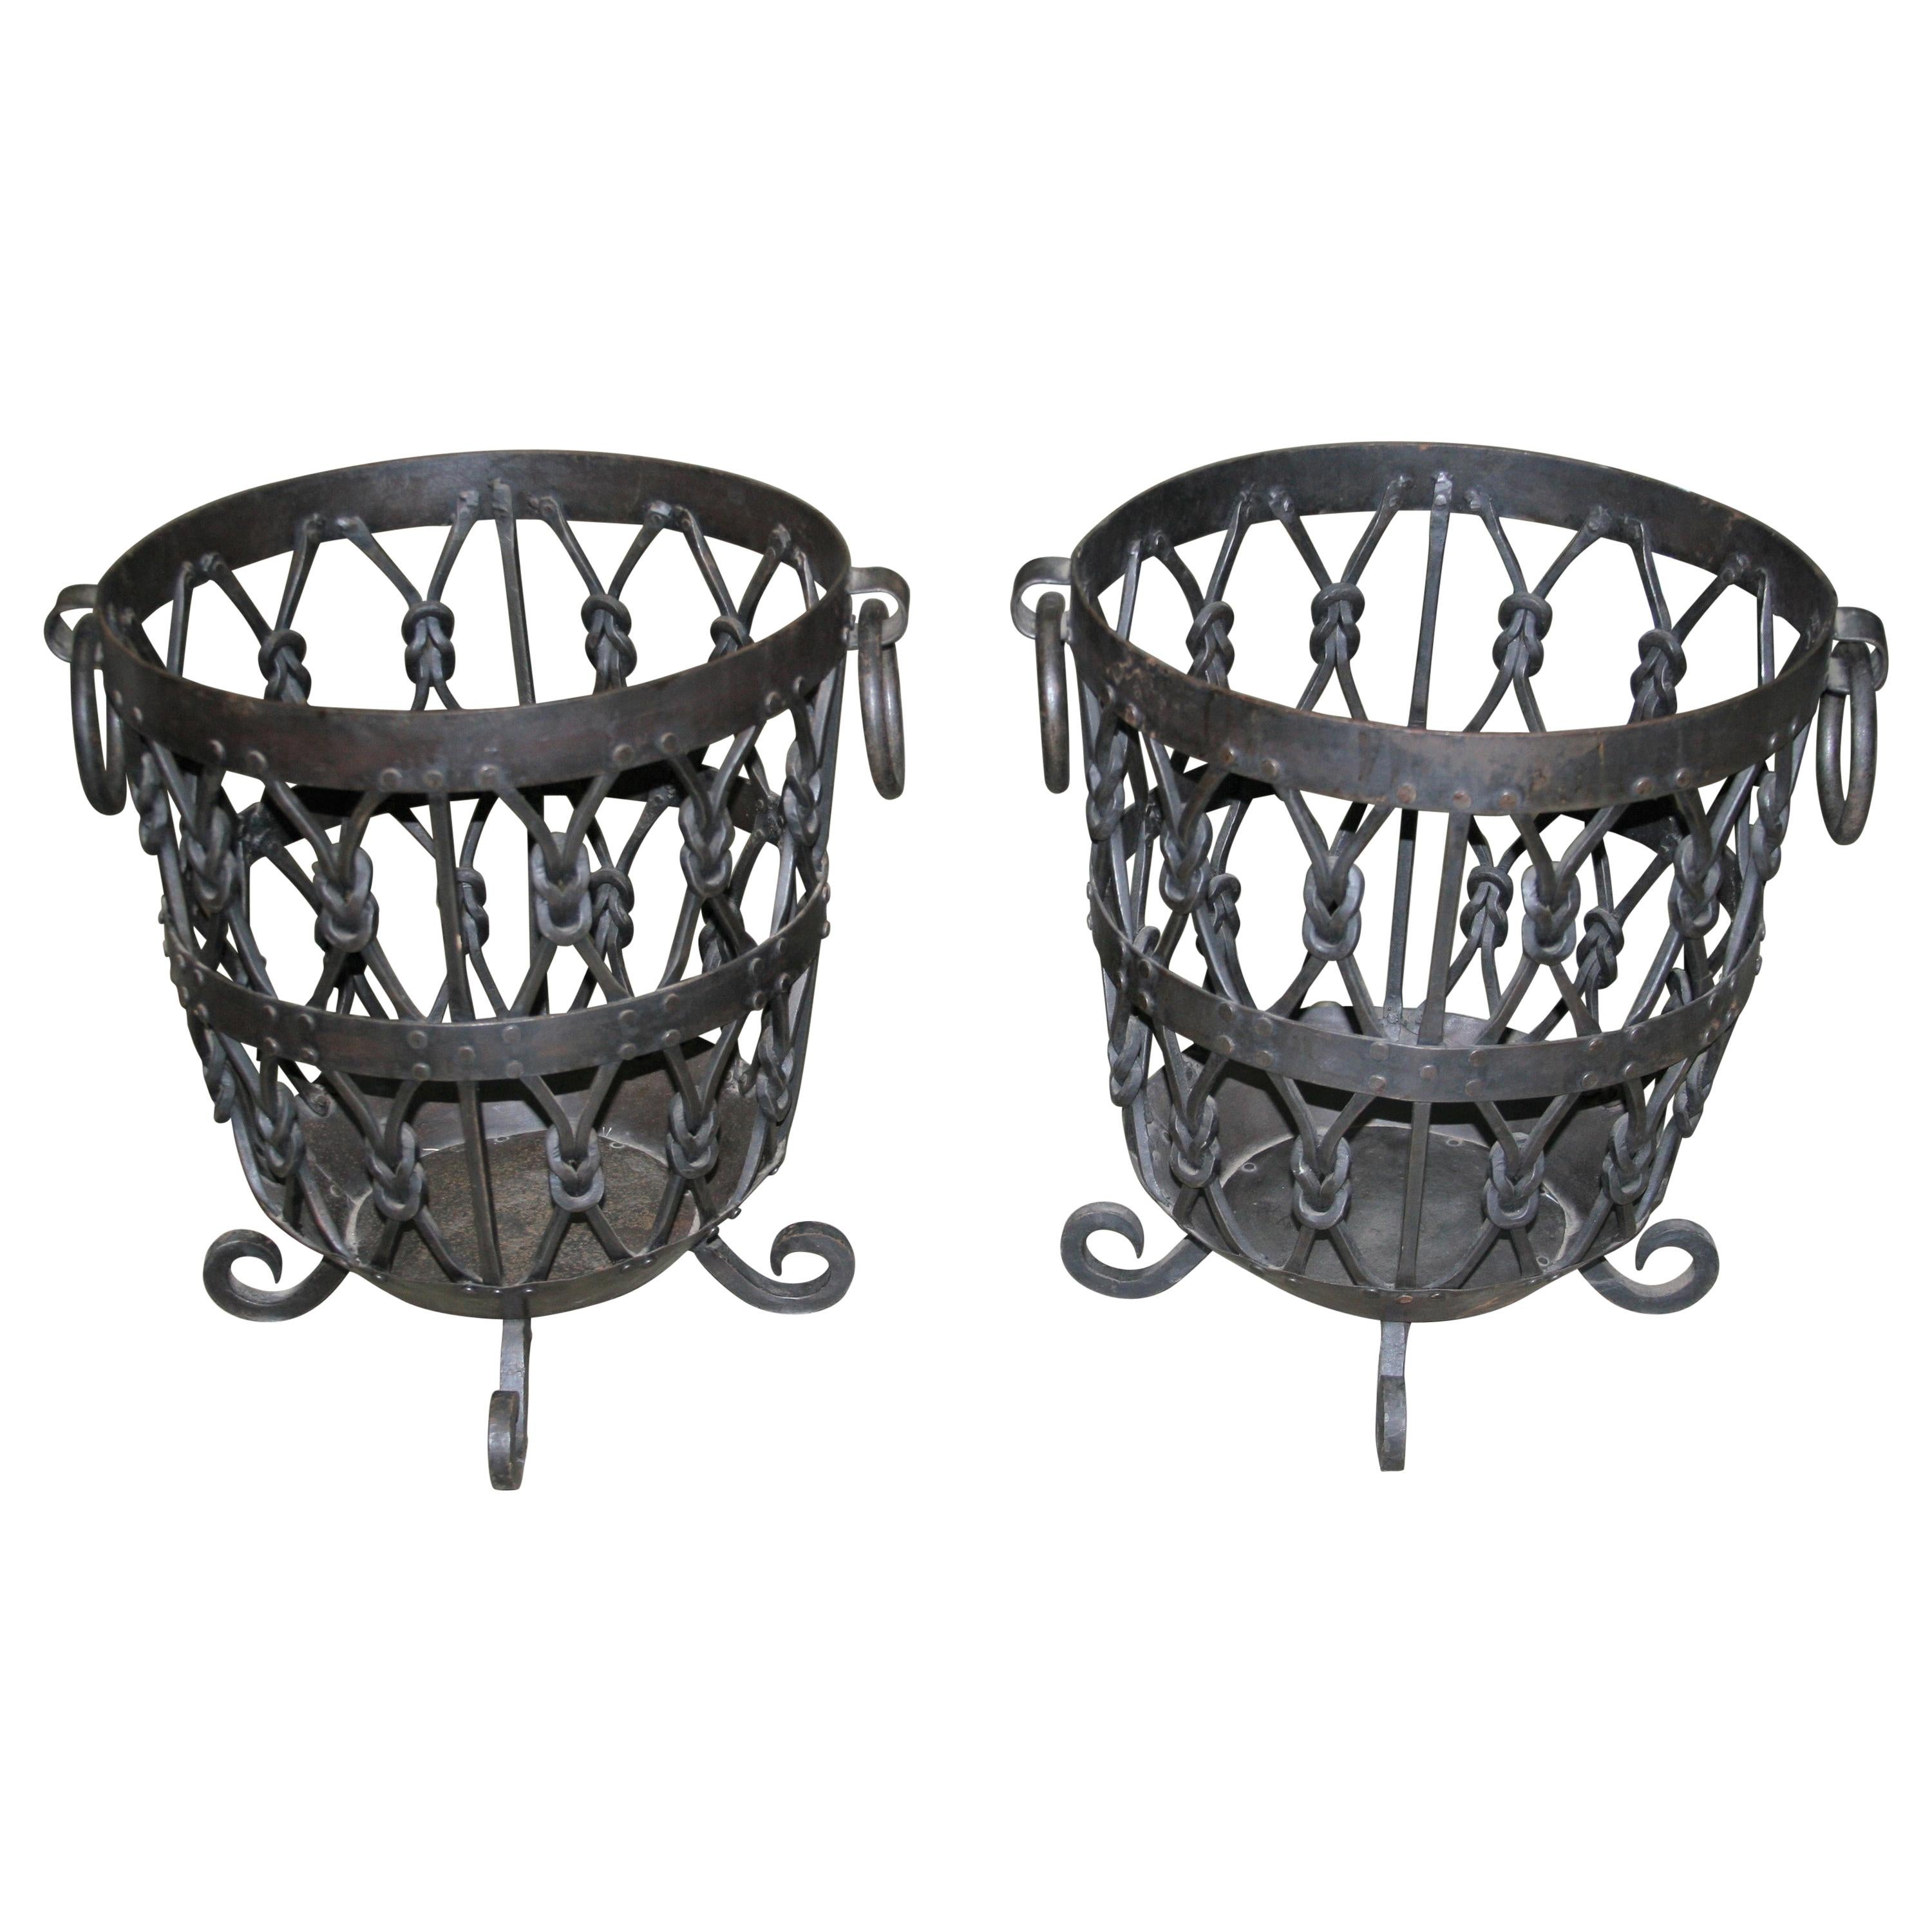 Pair of Artistic Creation of Iron Planters by a Village Master Blacksmith For Sale